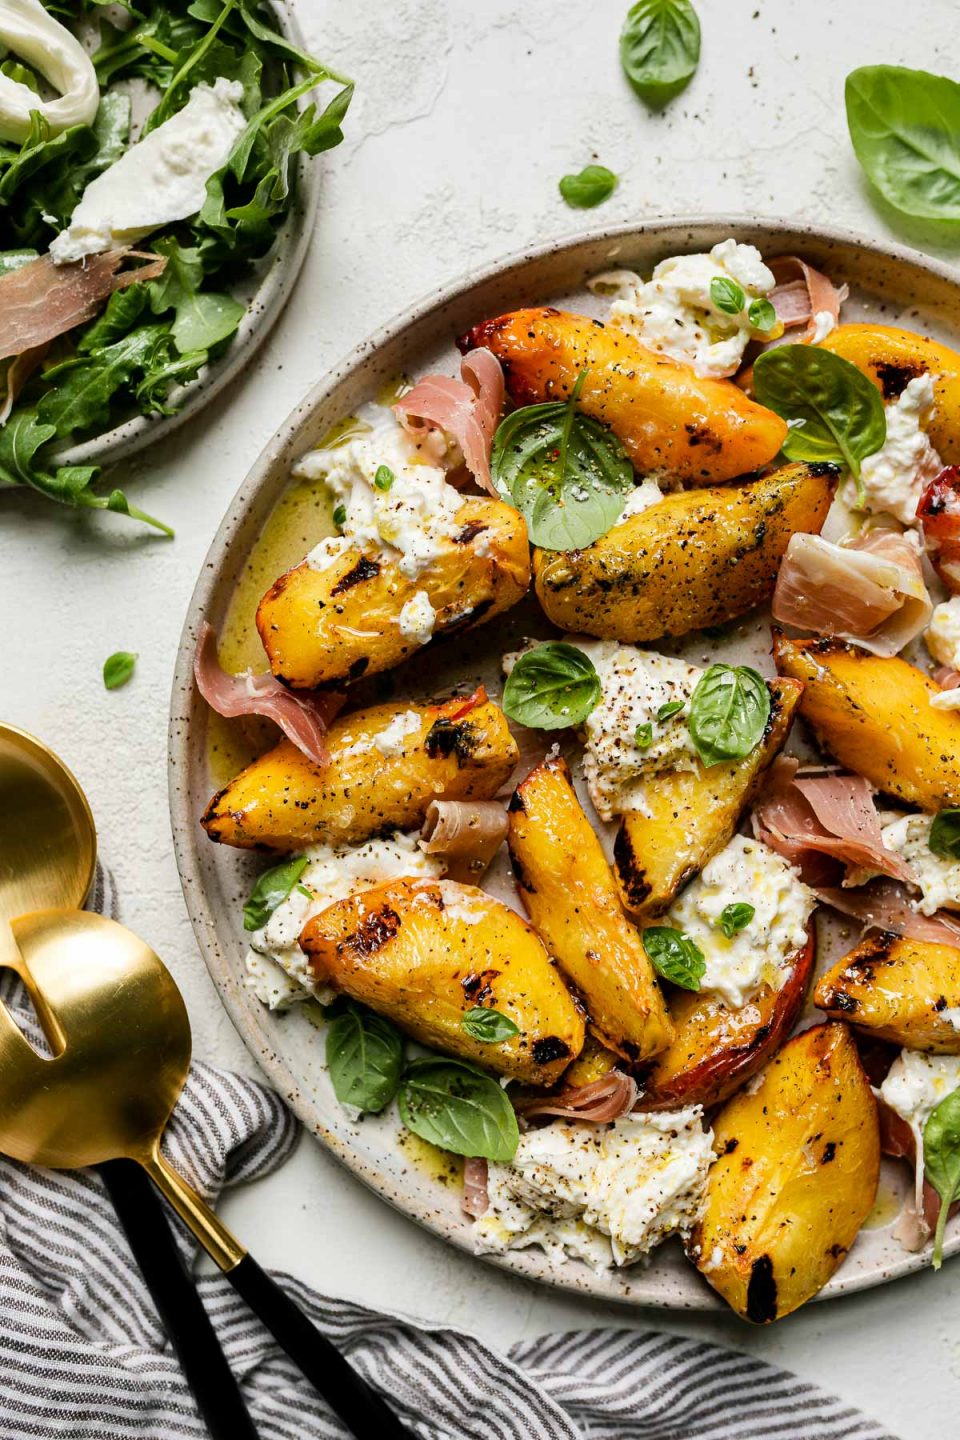 Grilled peaches, burrata cheese, fresh basil, & thinly sliced prosciutto arranged on a ceramic plate atop a textured white surface. Surrounding the grilled peach salad are fresh basil leaves, a small plate with arugula & grilled peach salad, a gray striped linen napkin, & large serving spoons.